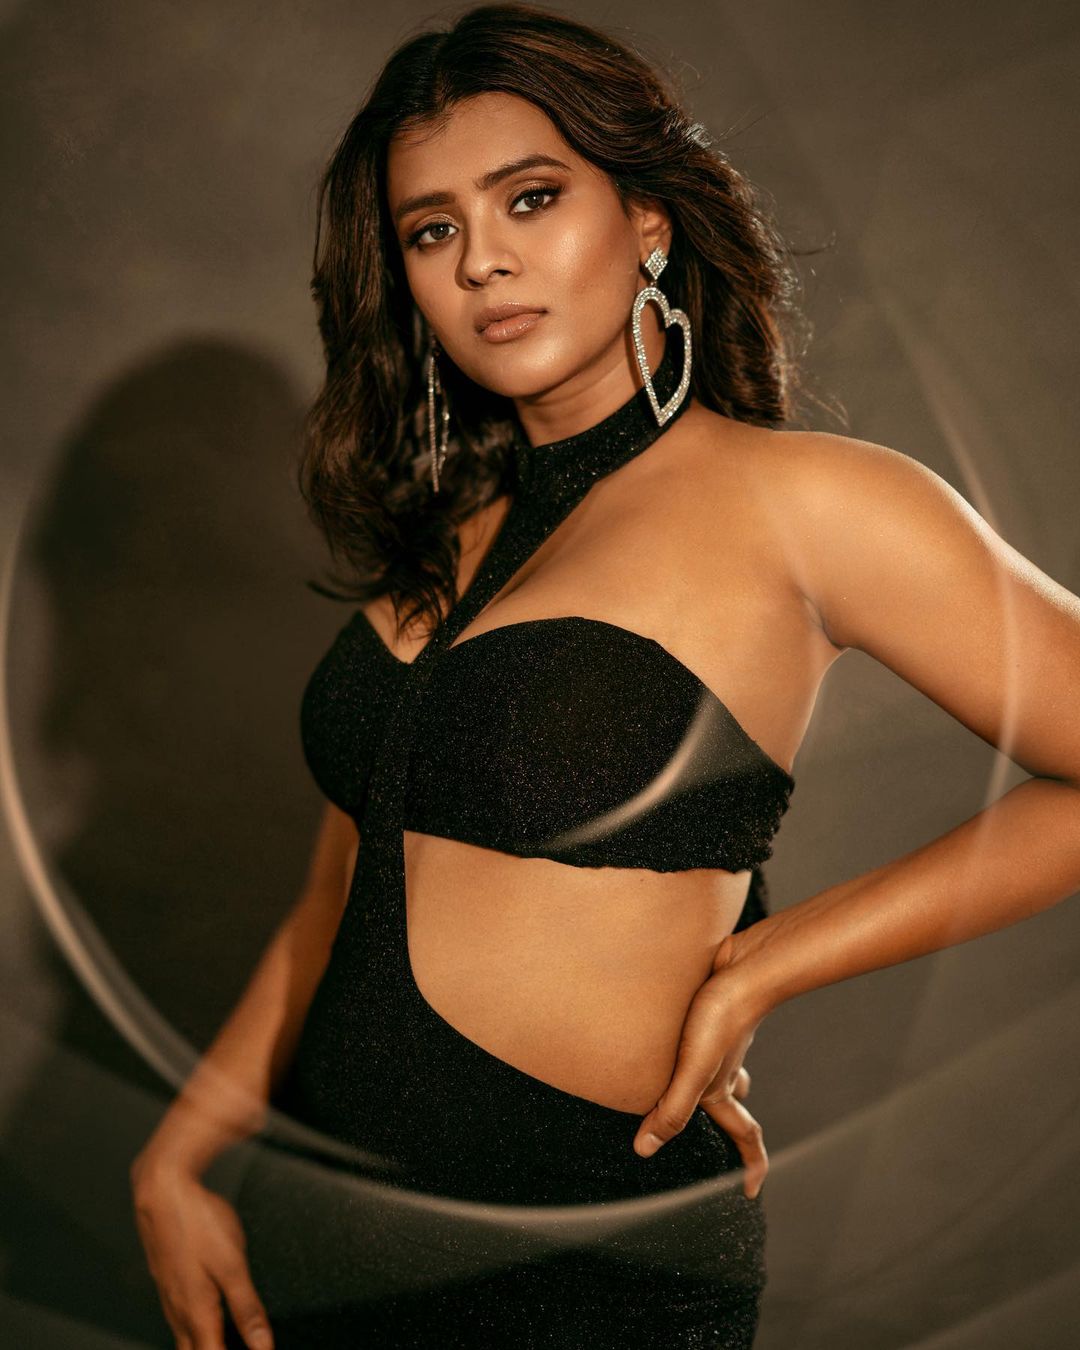 hebah-patel-hot-and-gorgeous-looks-in-amazing-black-outfit